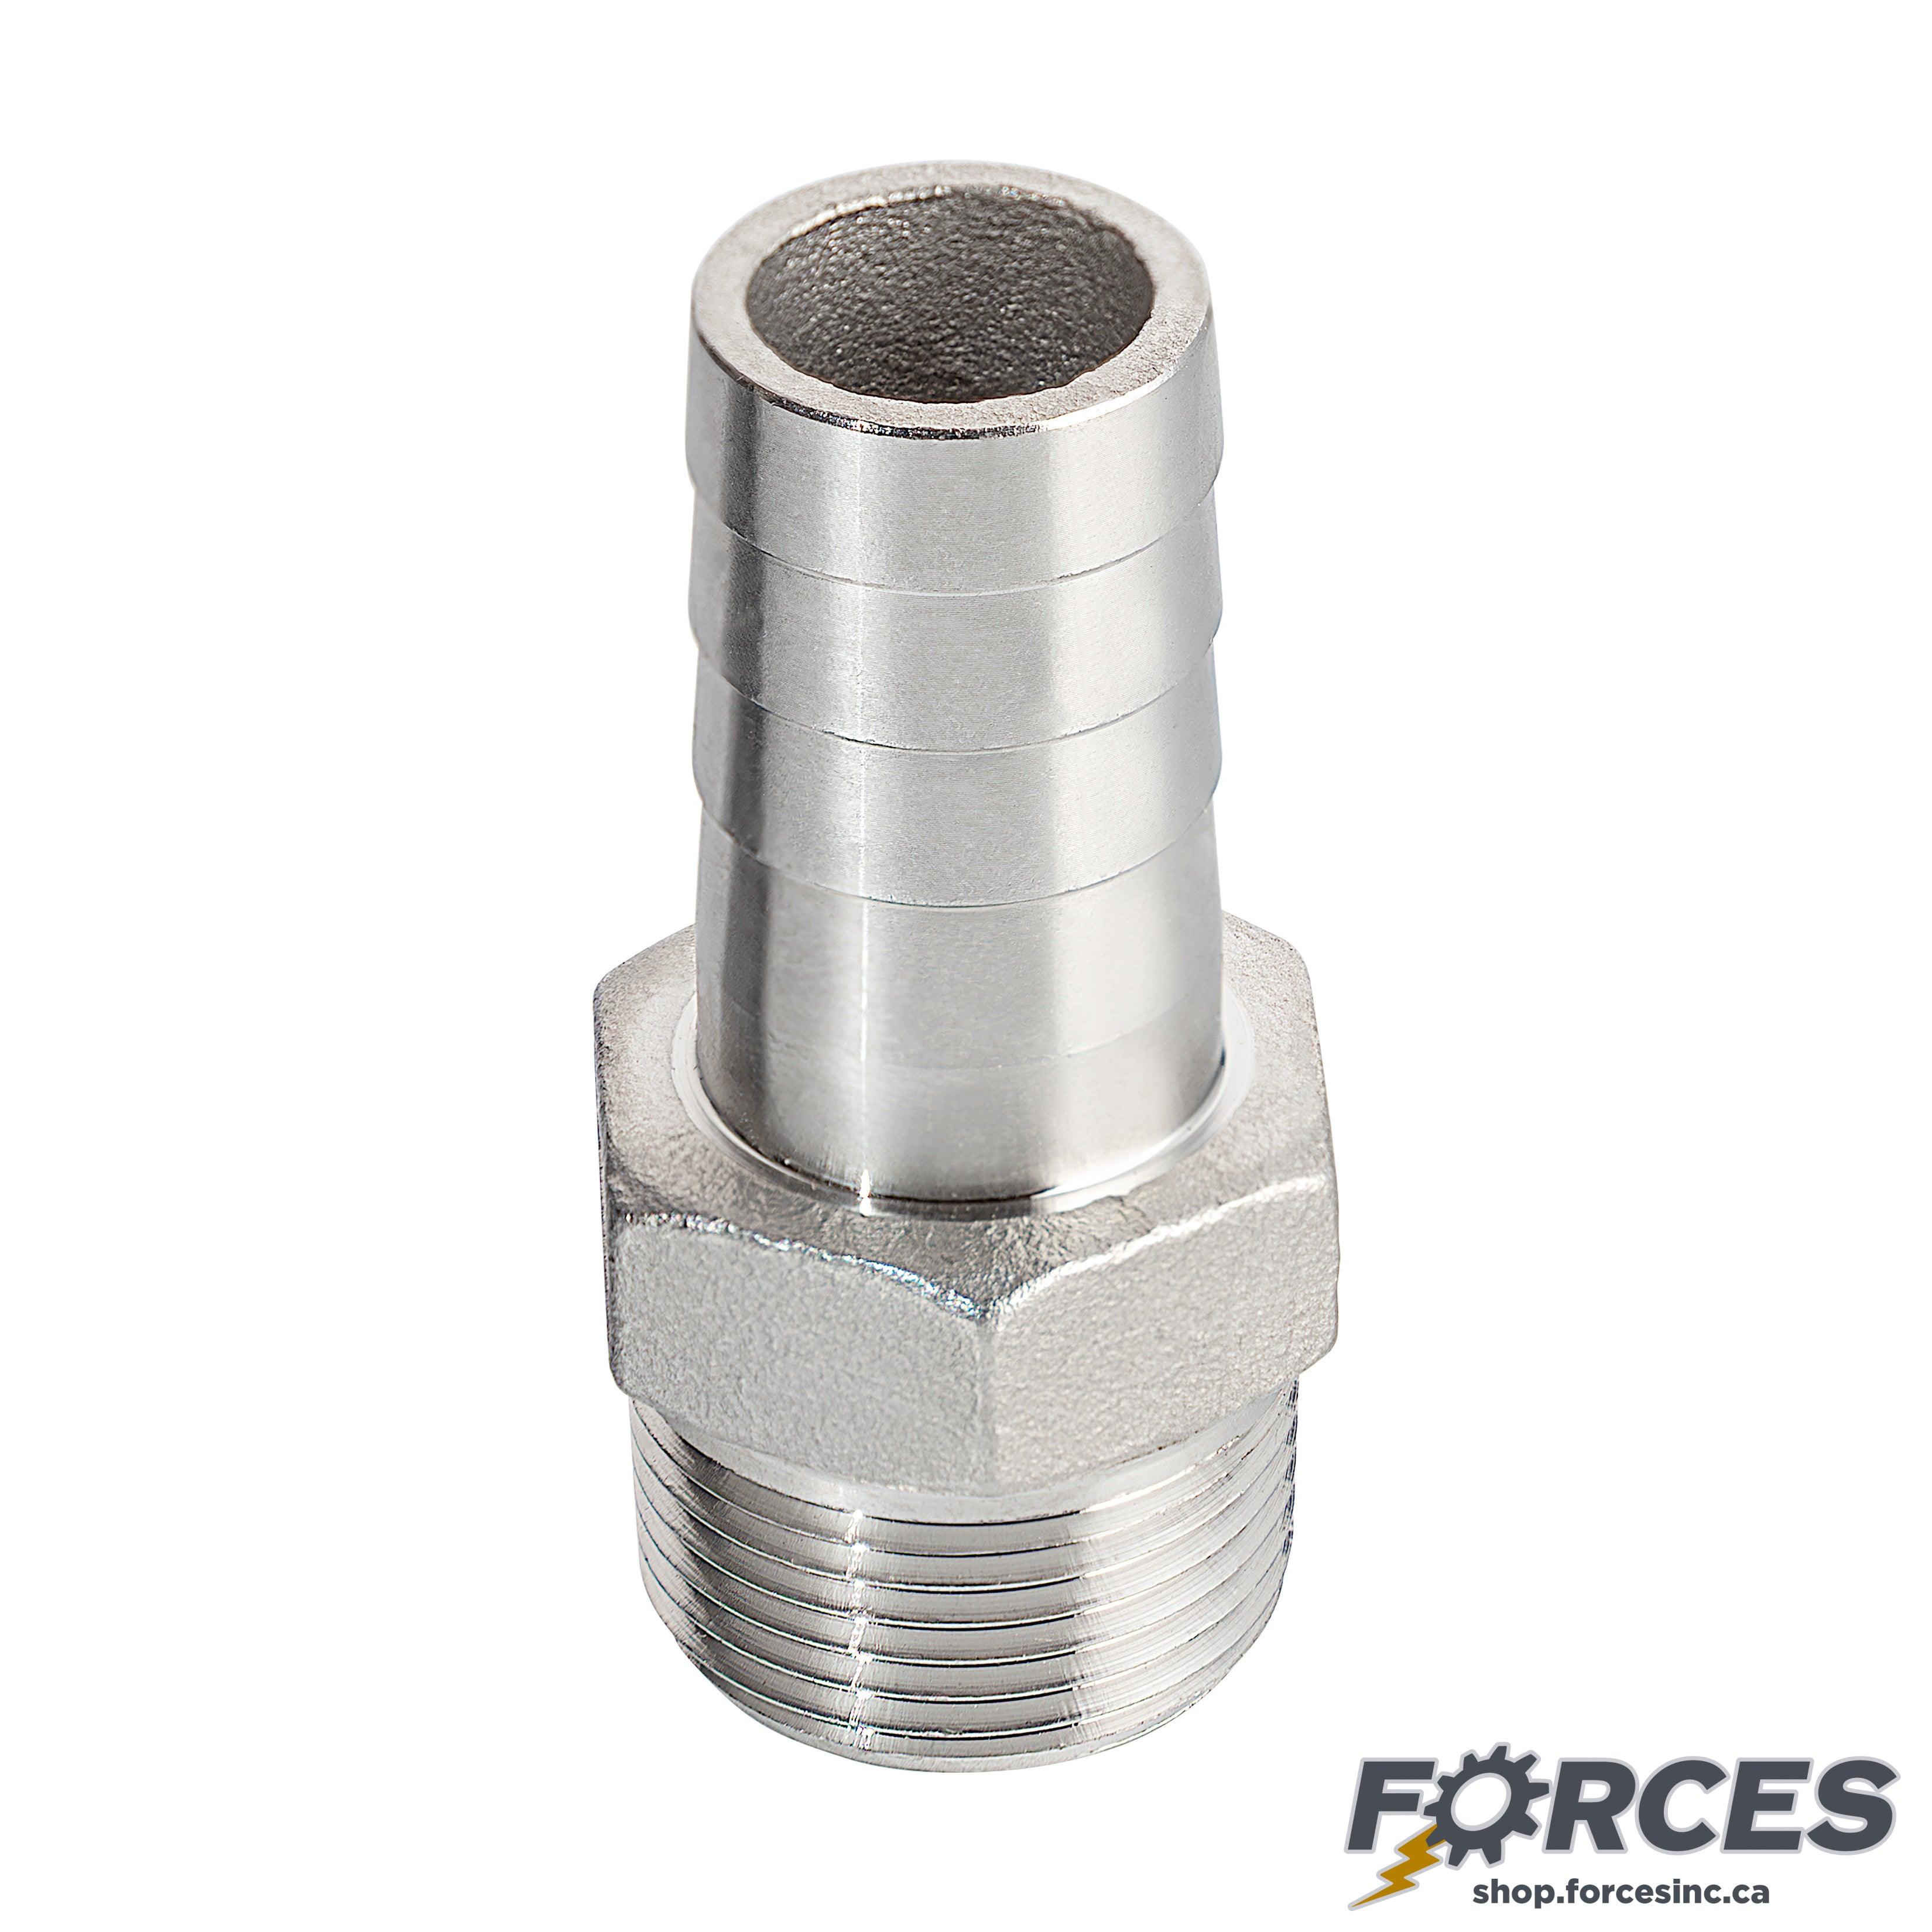 Hose Barb 1/2" x 1/2" NPT #150 - Stainless Steel 316 - Forces Inc